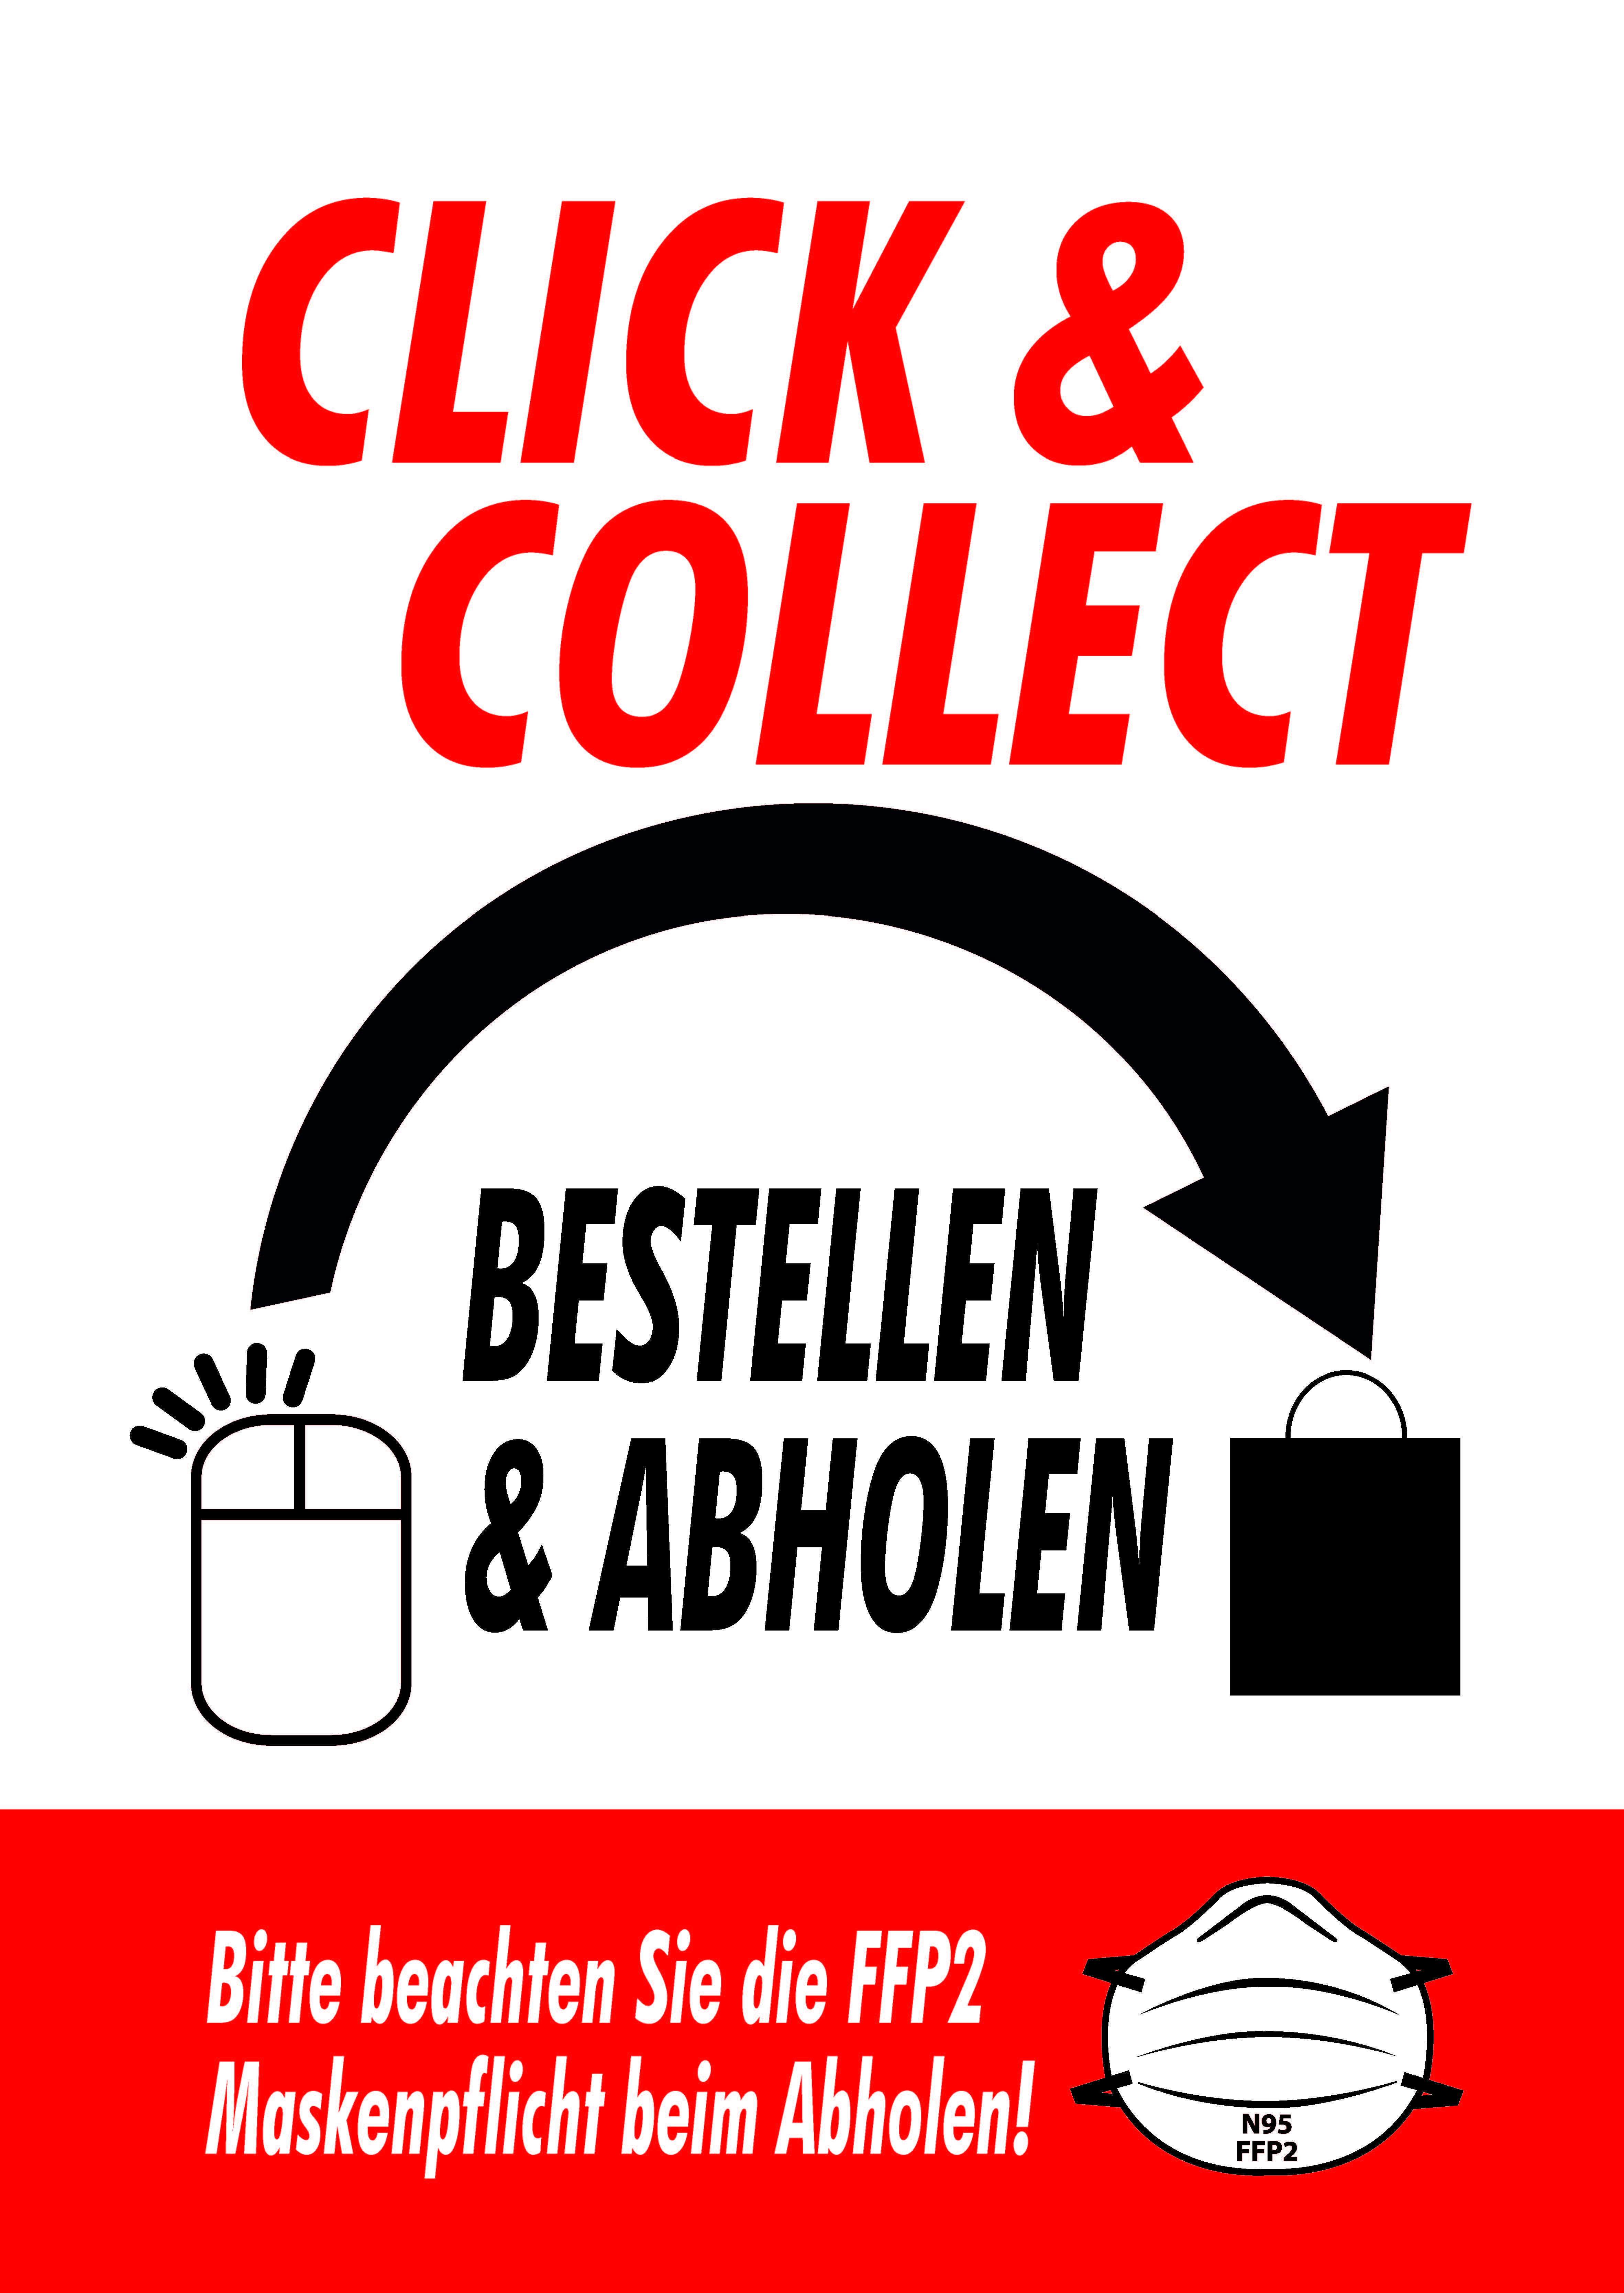 Aktion Corona-Hinweise Click & Collect Vers.3 - PVC-Poster A1 für Kundenstopper